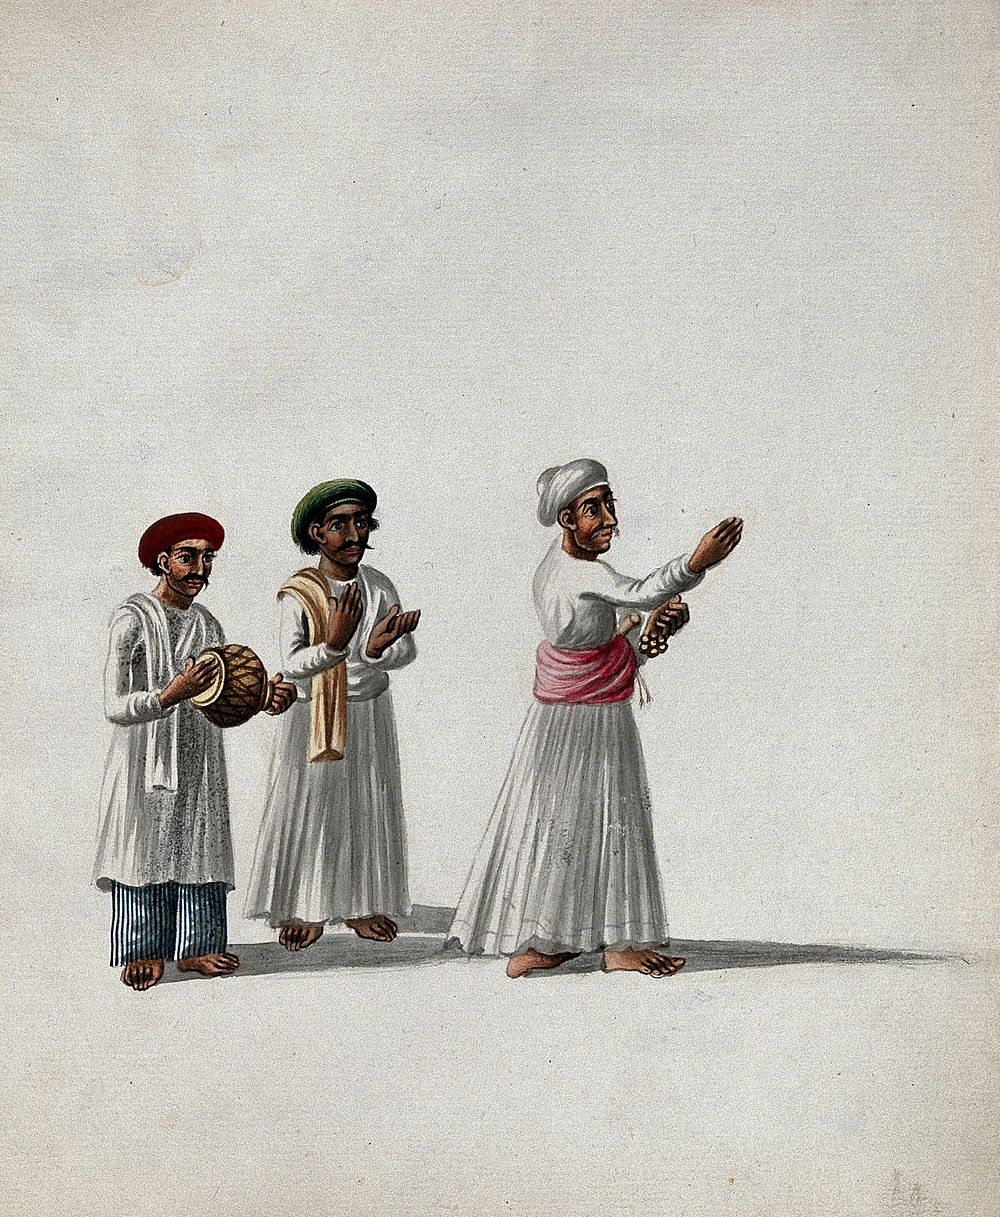 Three musicians performing. Gouache painting by an Indian artist.